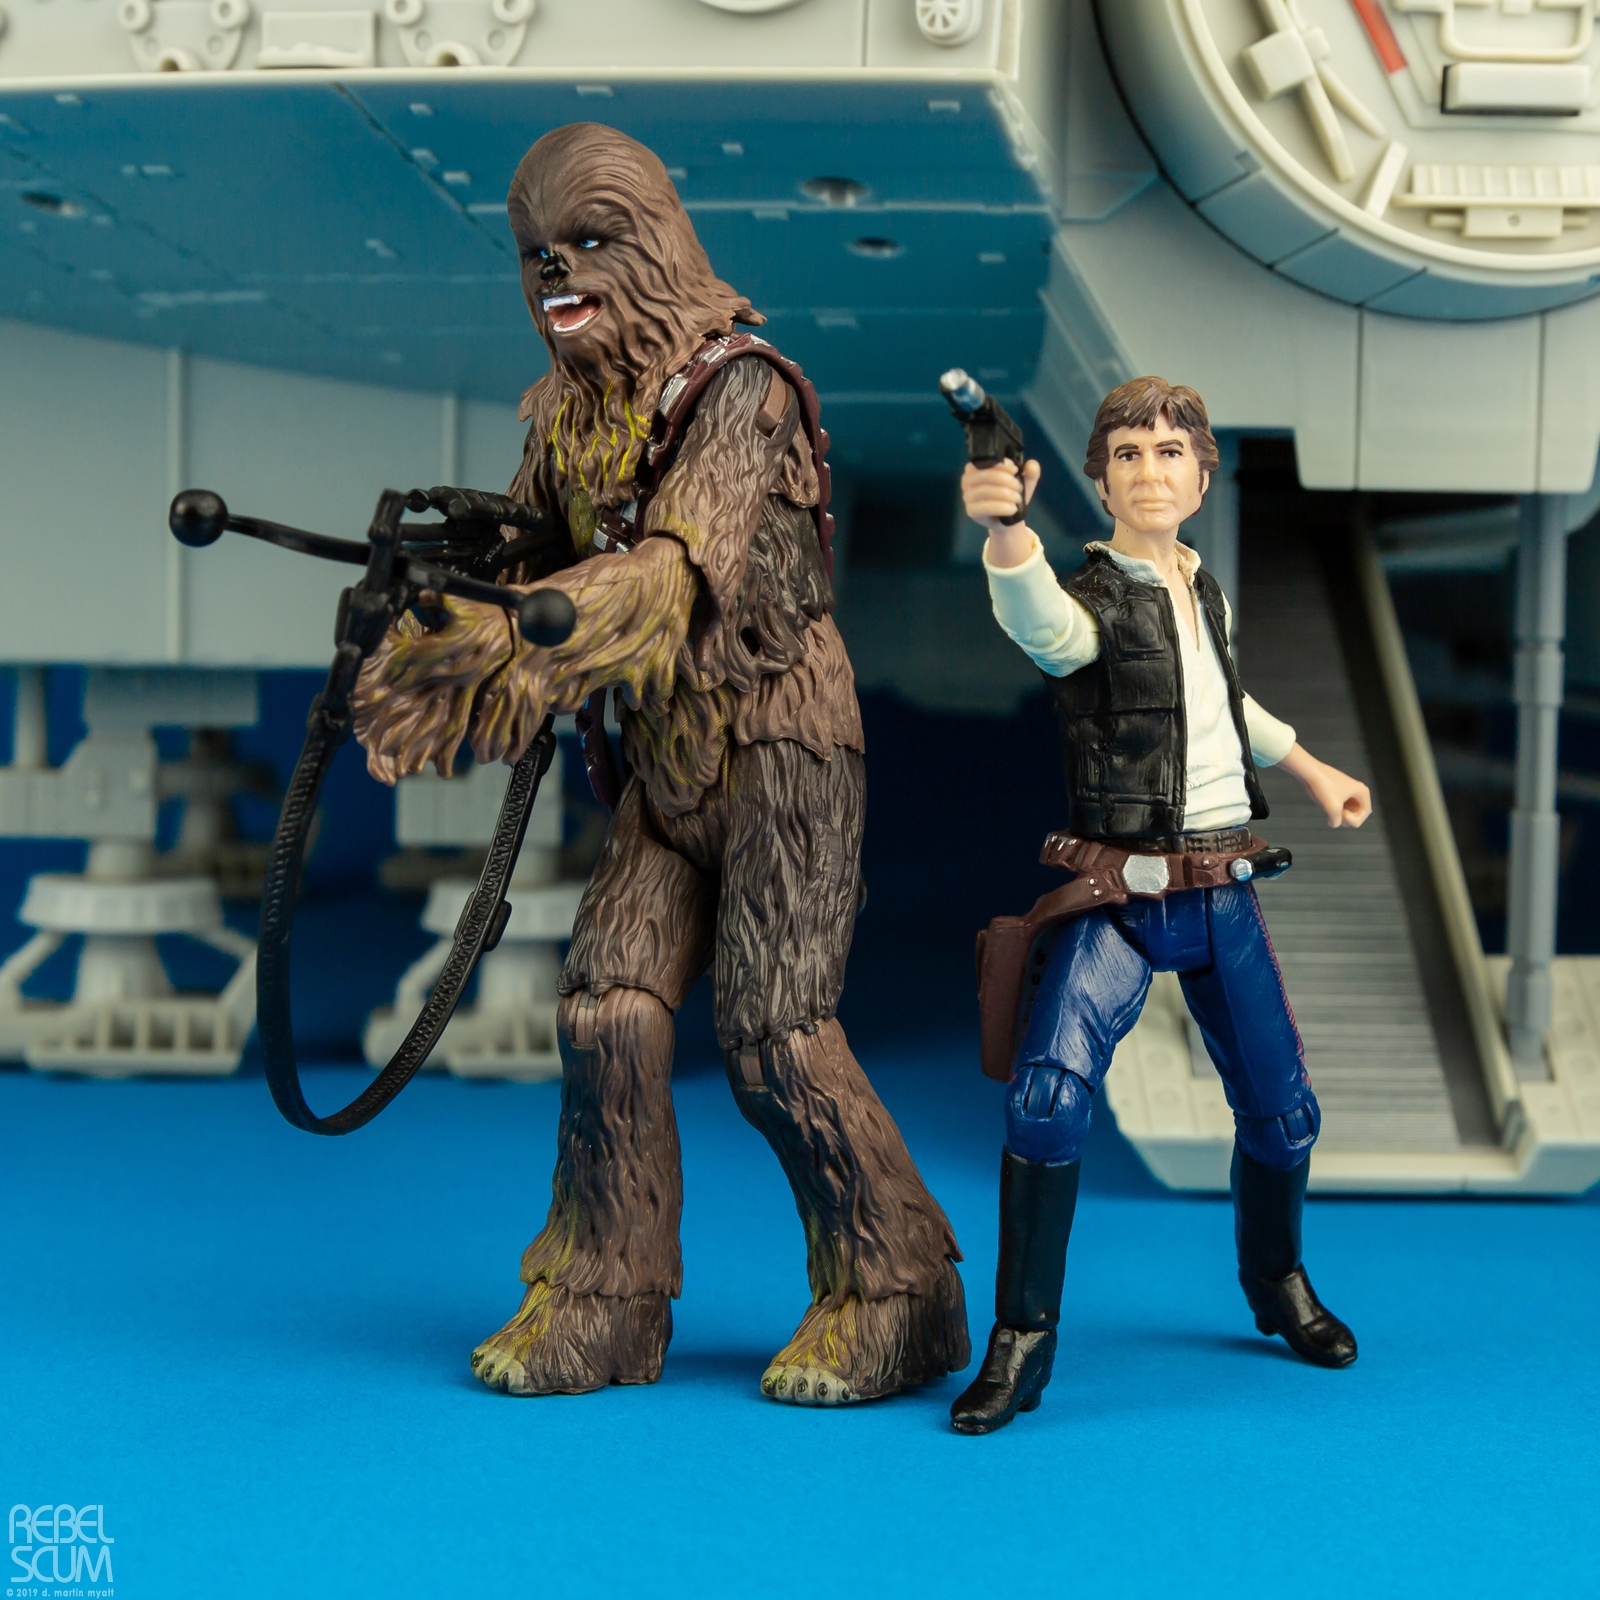 VC141-Chewbacca-The-Vintage-Collection-007.jpg